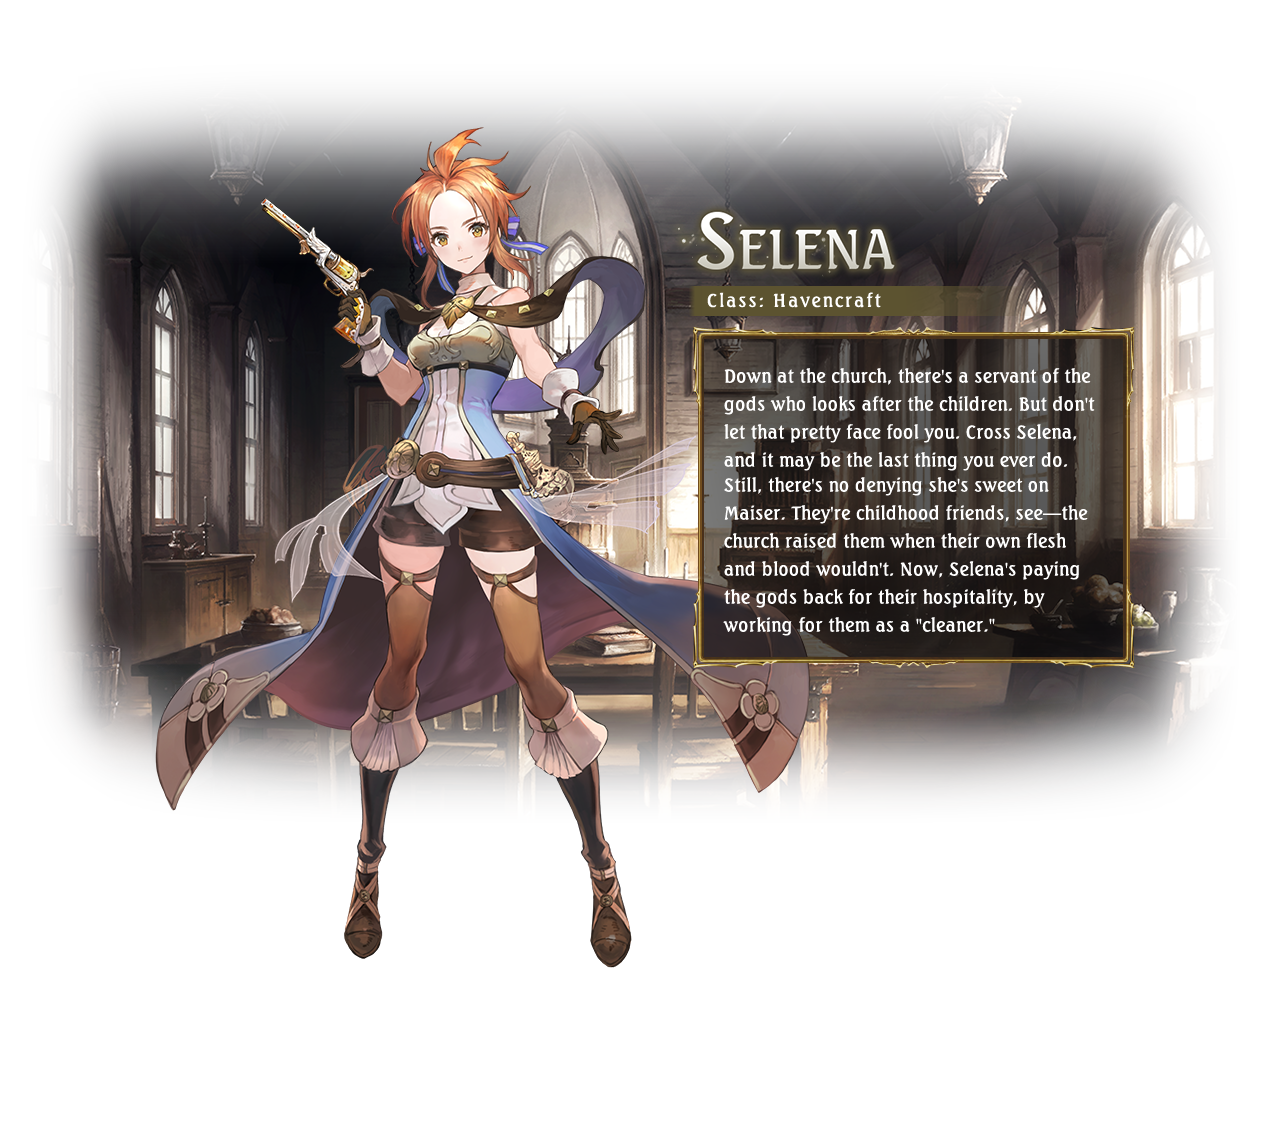 Selena Class: Havencraft Down at the church, there's a servant of the gods who looks after the children. But don't let that pretty face fool you. Cross Selena, and it may be the last thing you ever do. Still, there's no denying she's sweet on Maiser. They're childhood friends, see—the church raised them when their own flesh and blood wouldn't. Now, Selena's paying the gods back for their hospitality, by working for them as a 'cleaner.'